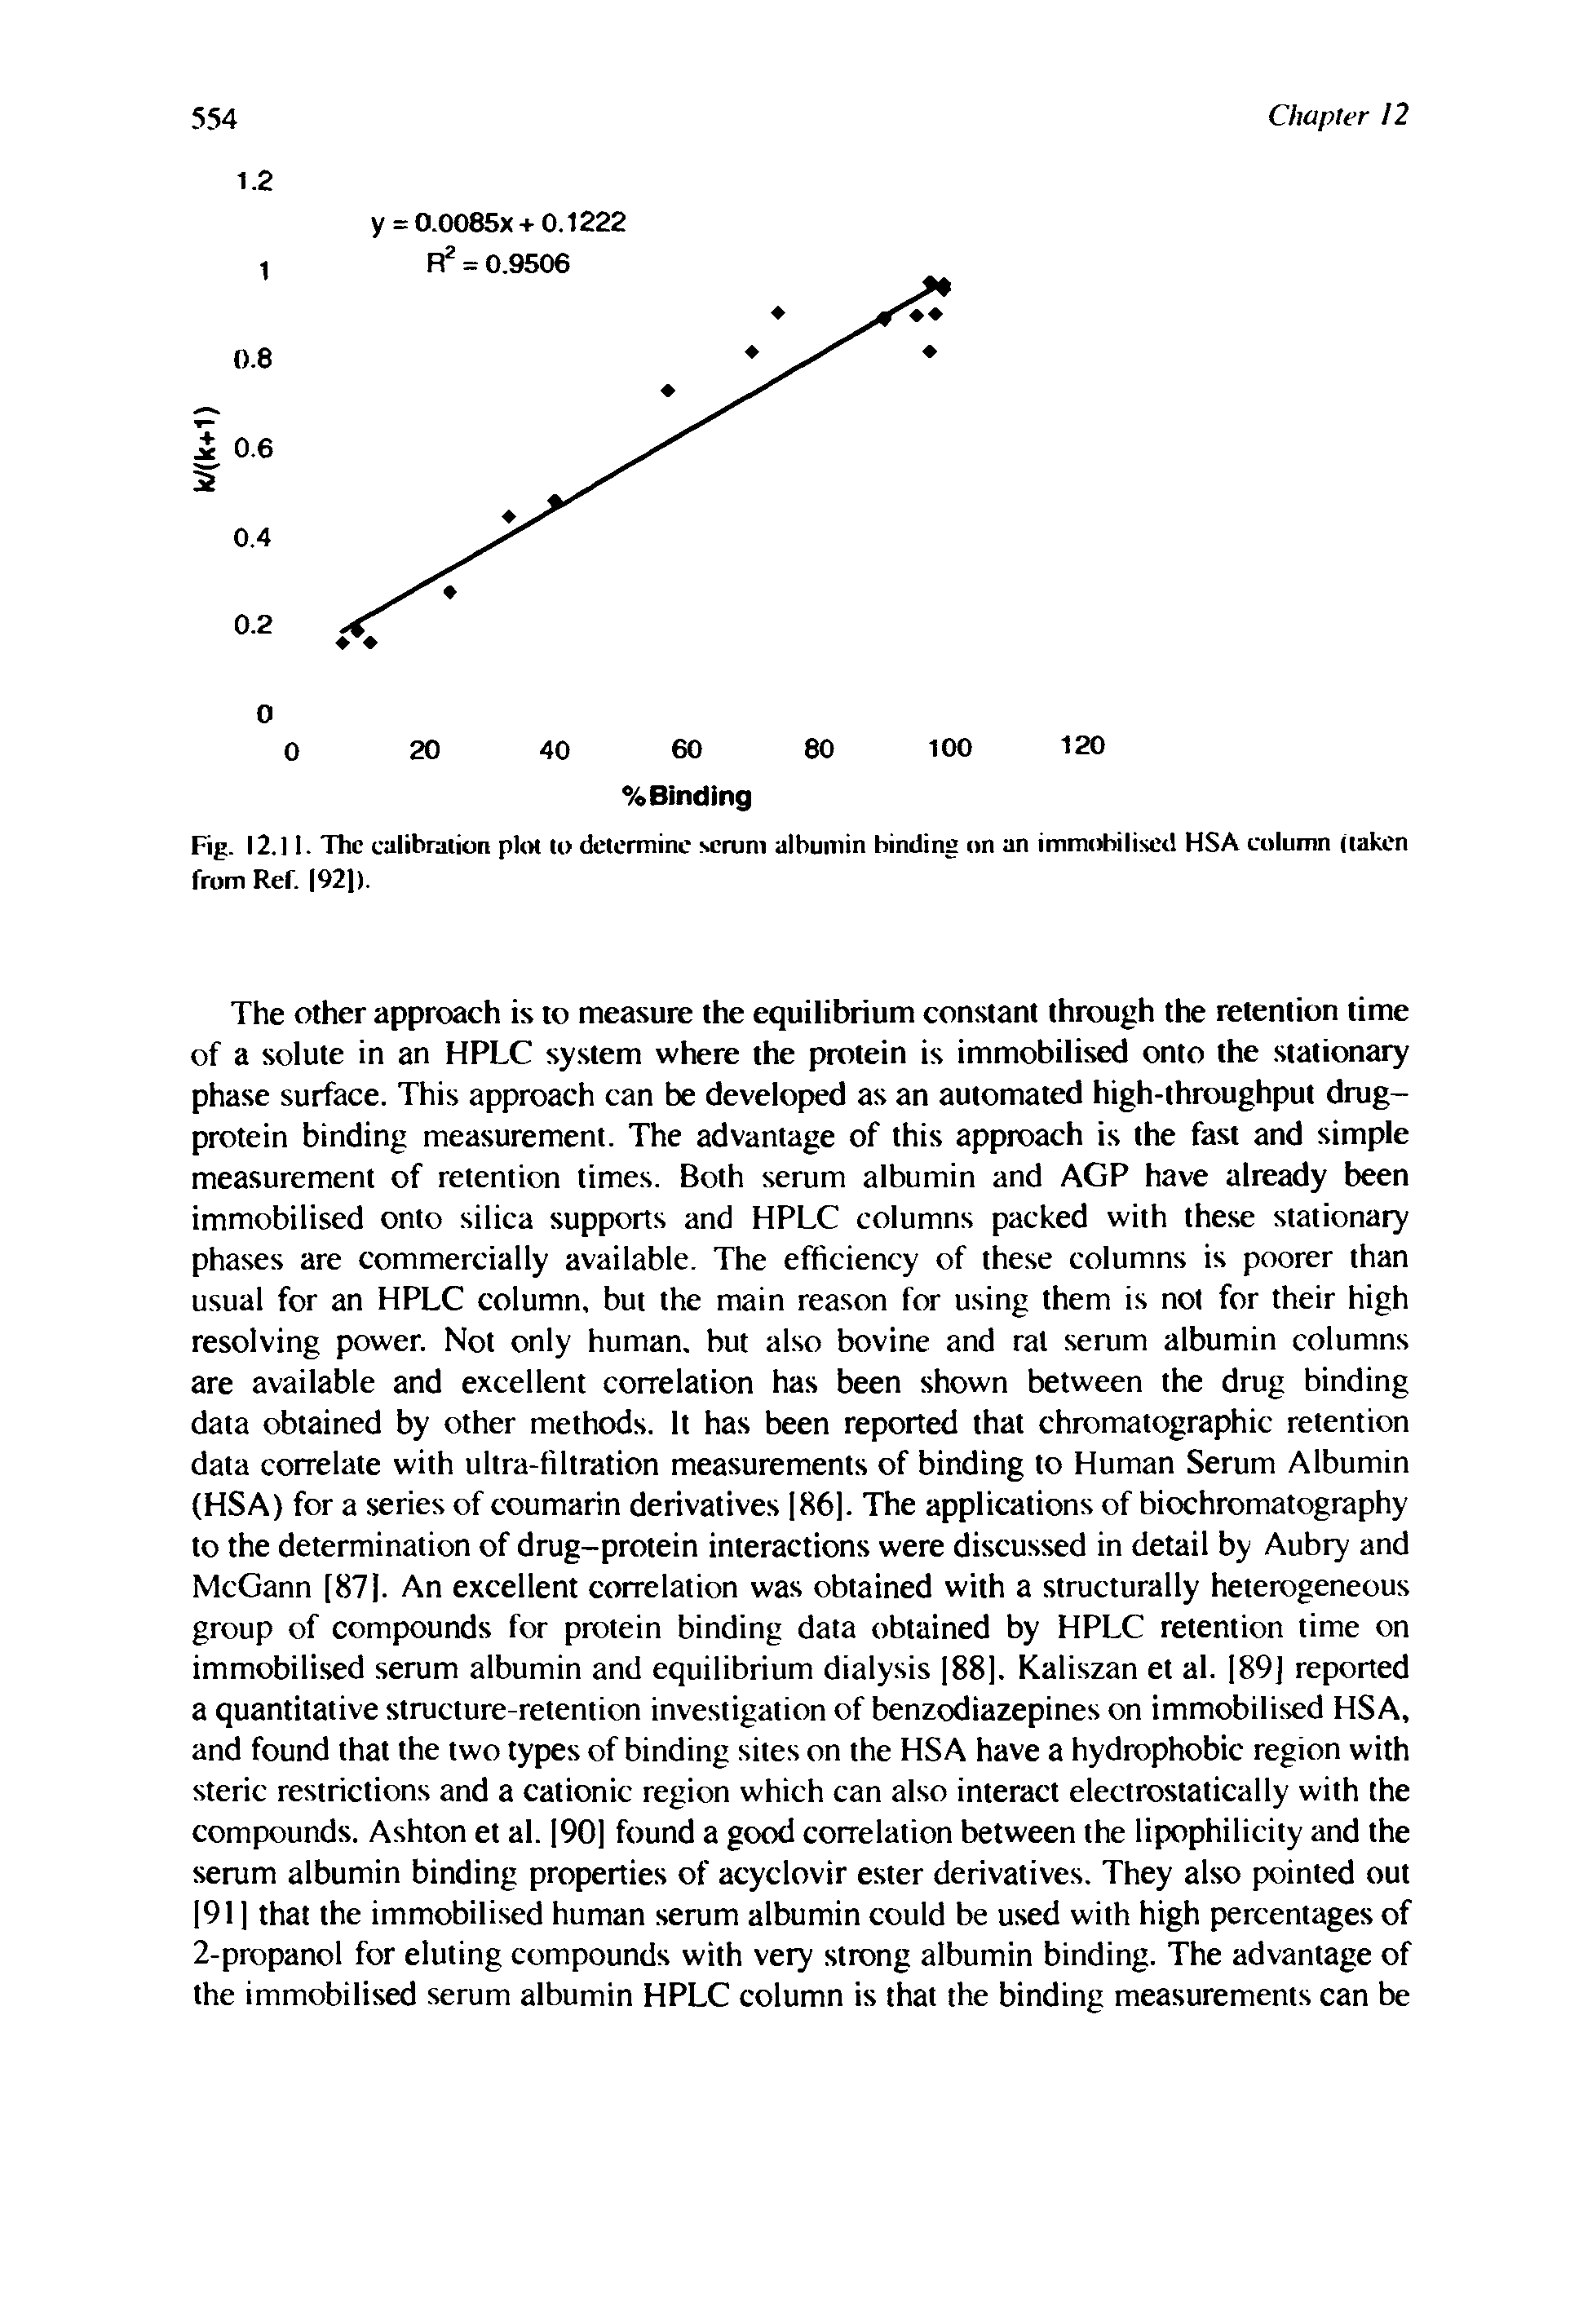 Fig. 12.11. The calibration plot to determine serum albumin binding on an immobilised HSA column (taken from Ref. 192]).